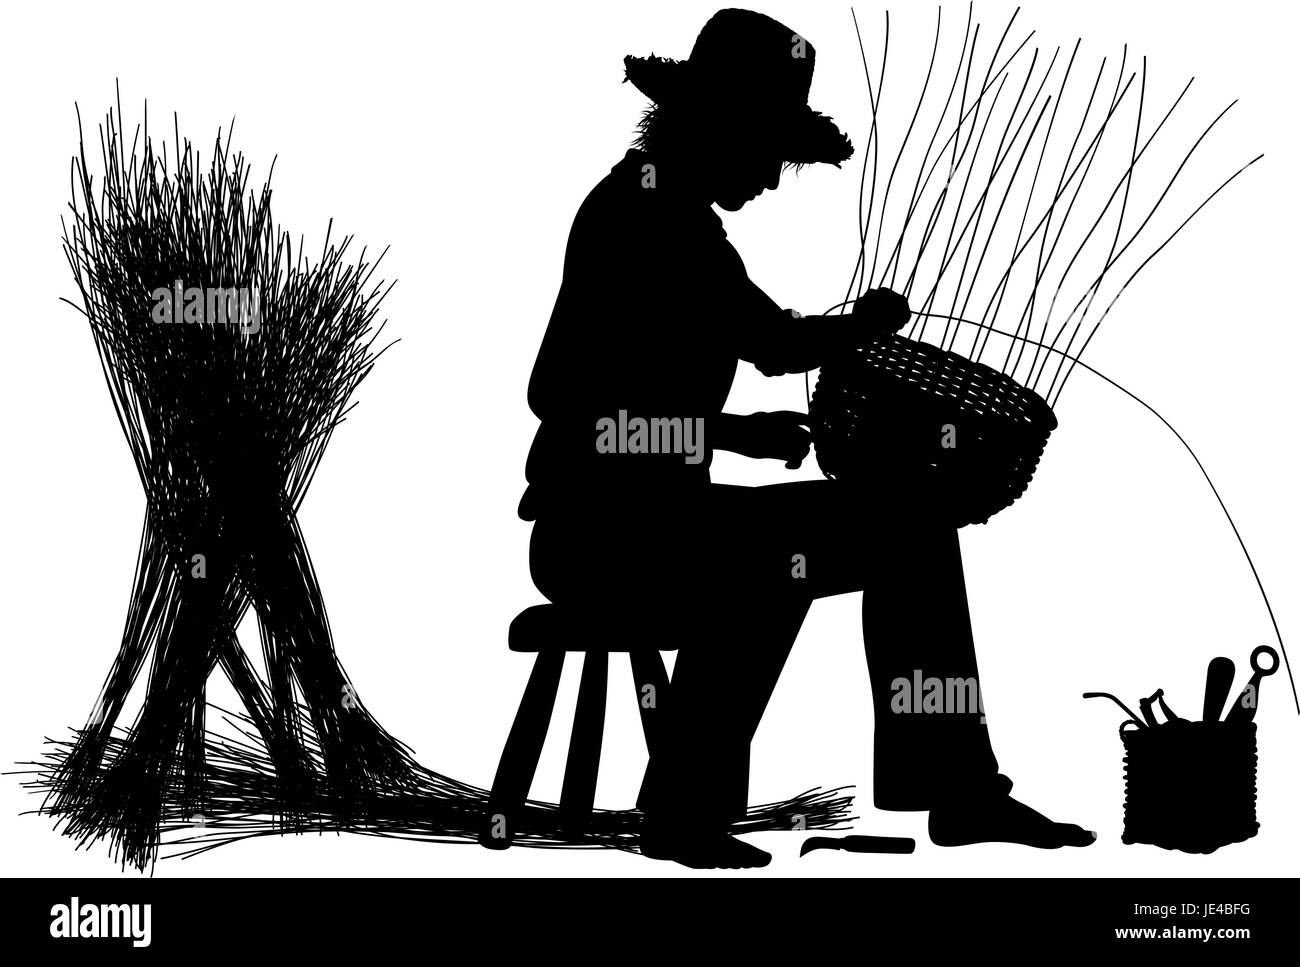 Editable vector silhouette of a craftsman making a basket with elements as separate objects Stock Vector